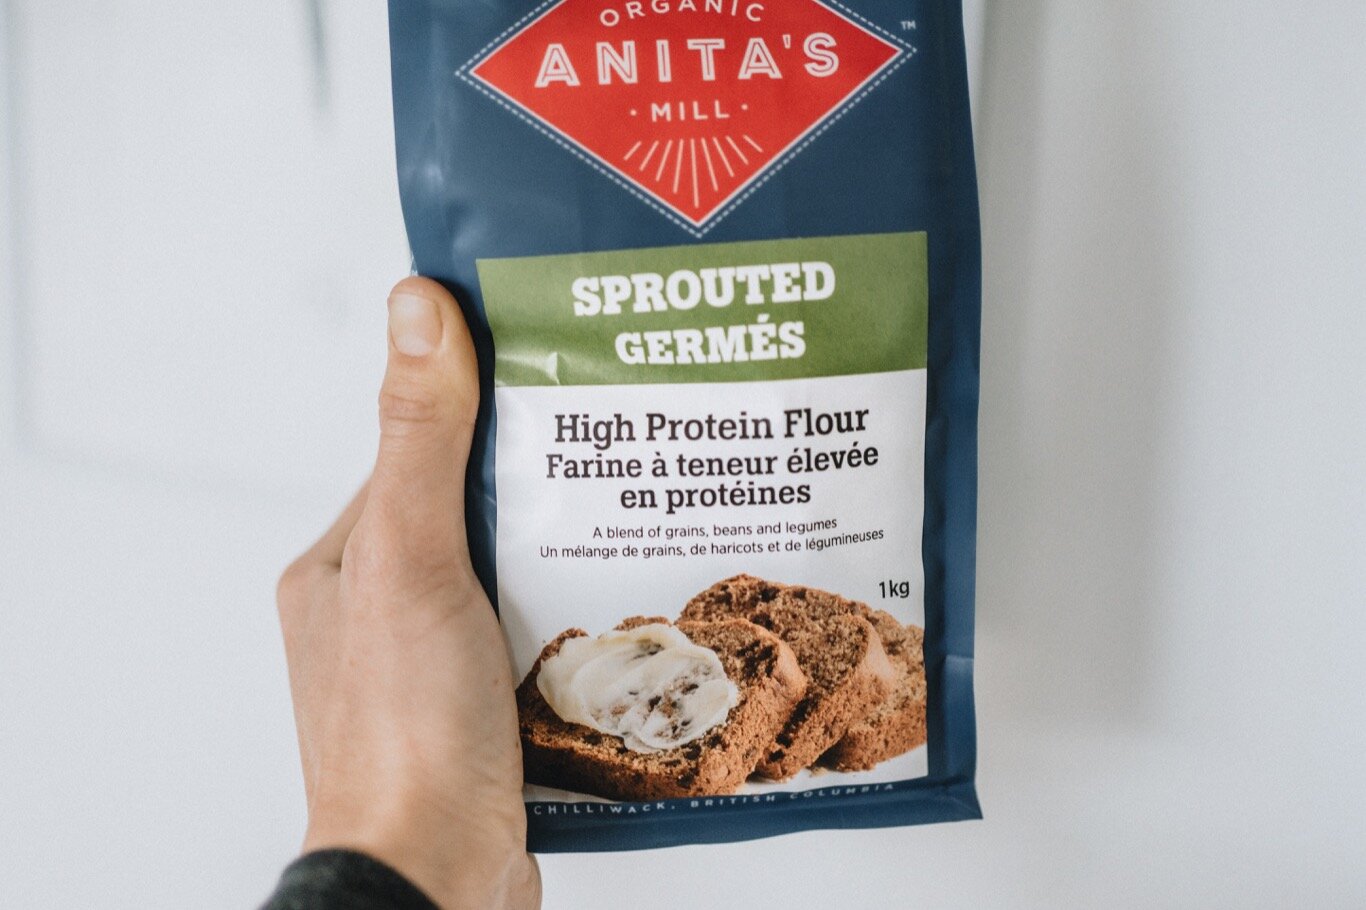 Anitas-Organic-Mill-Product-2020-sprouted-high-protien-flour-1kg-horizontal-web.jpg